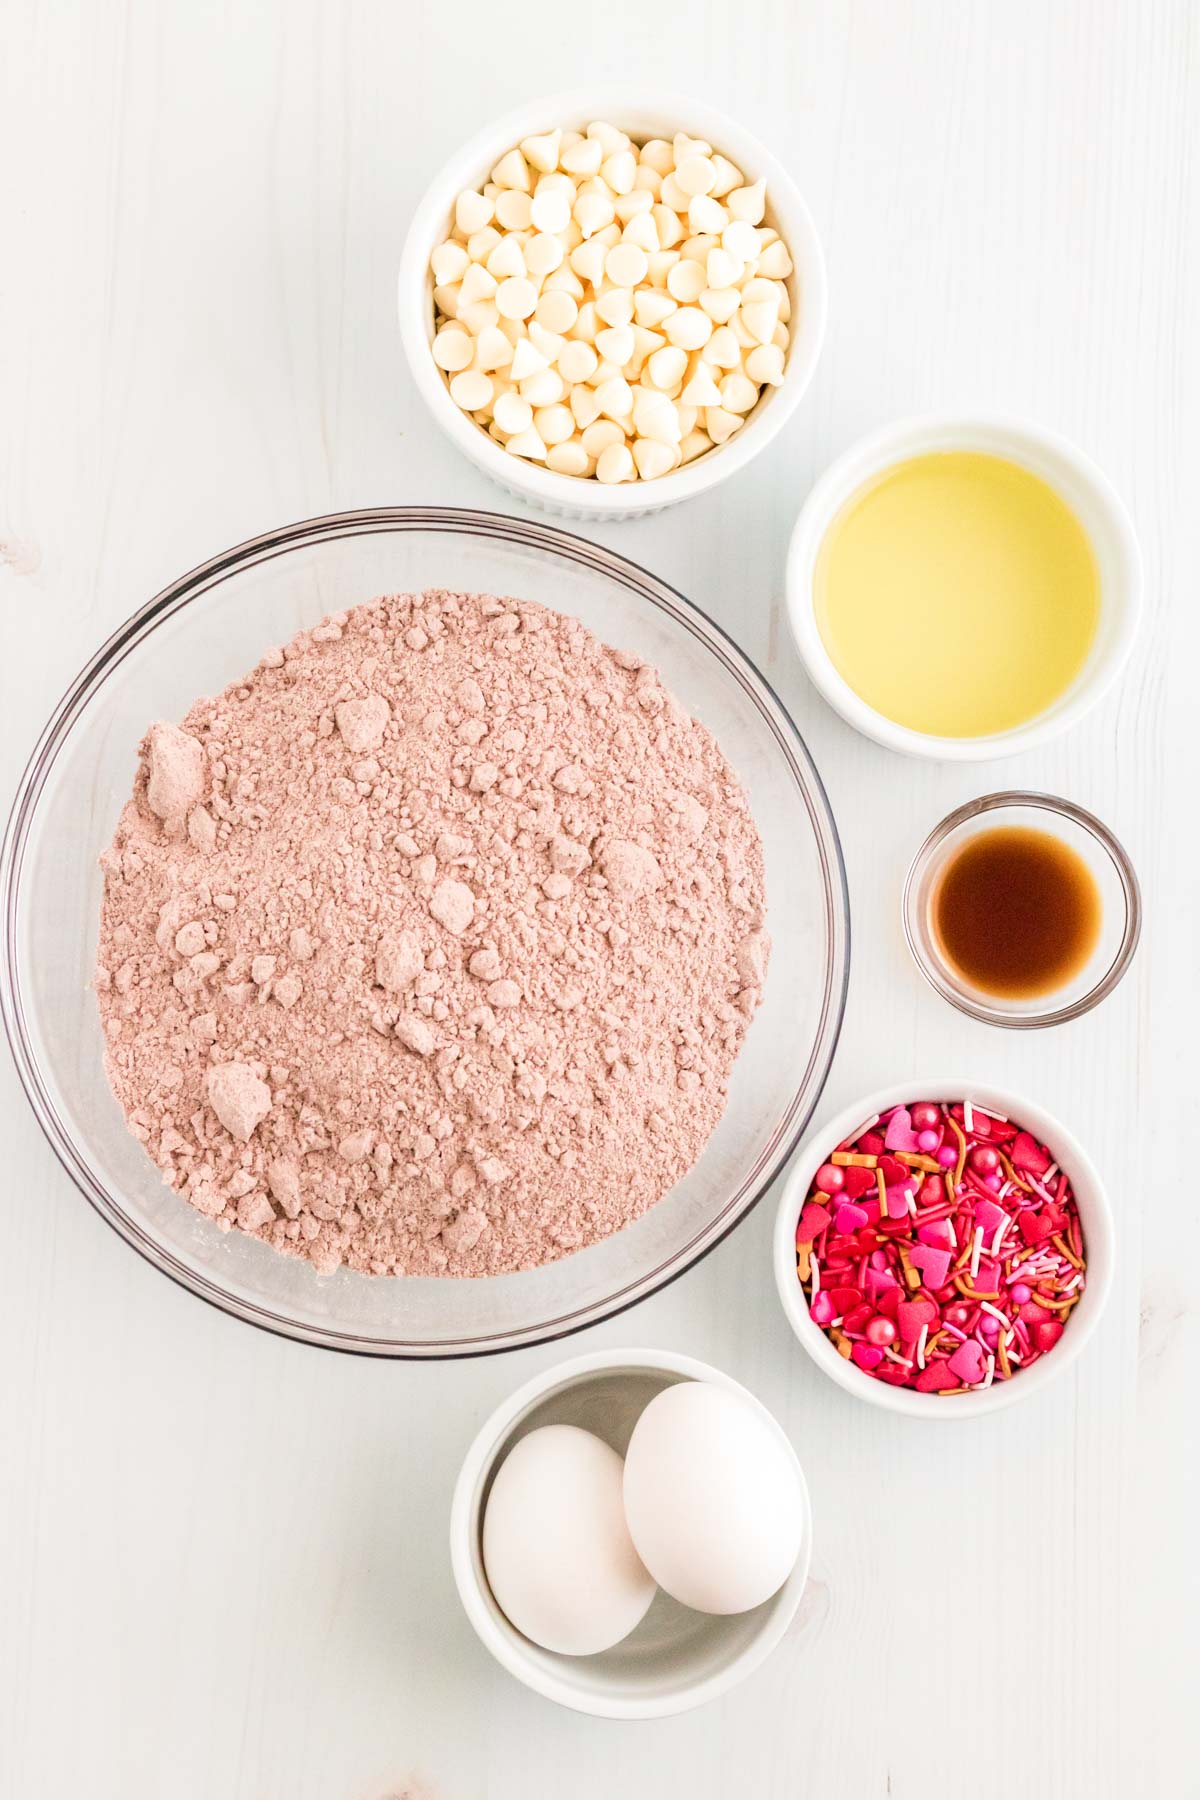 Ingredients to make red velvet cookies from cake mix for valentine's day on a white table.